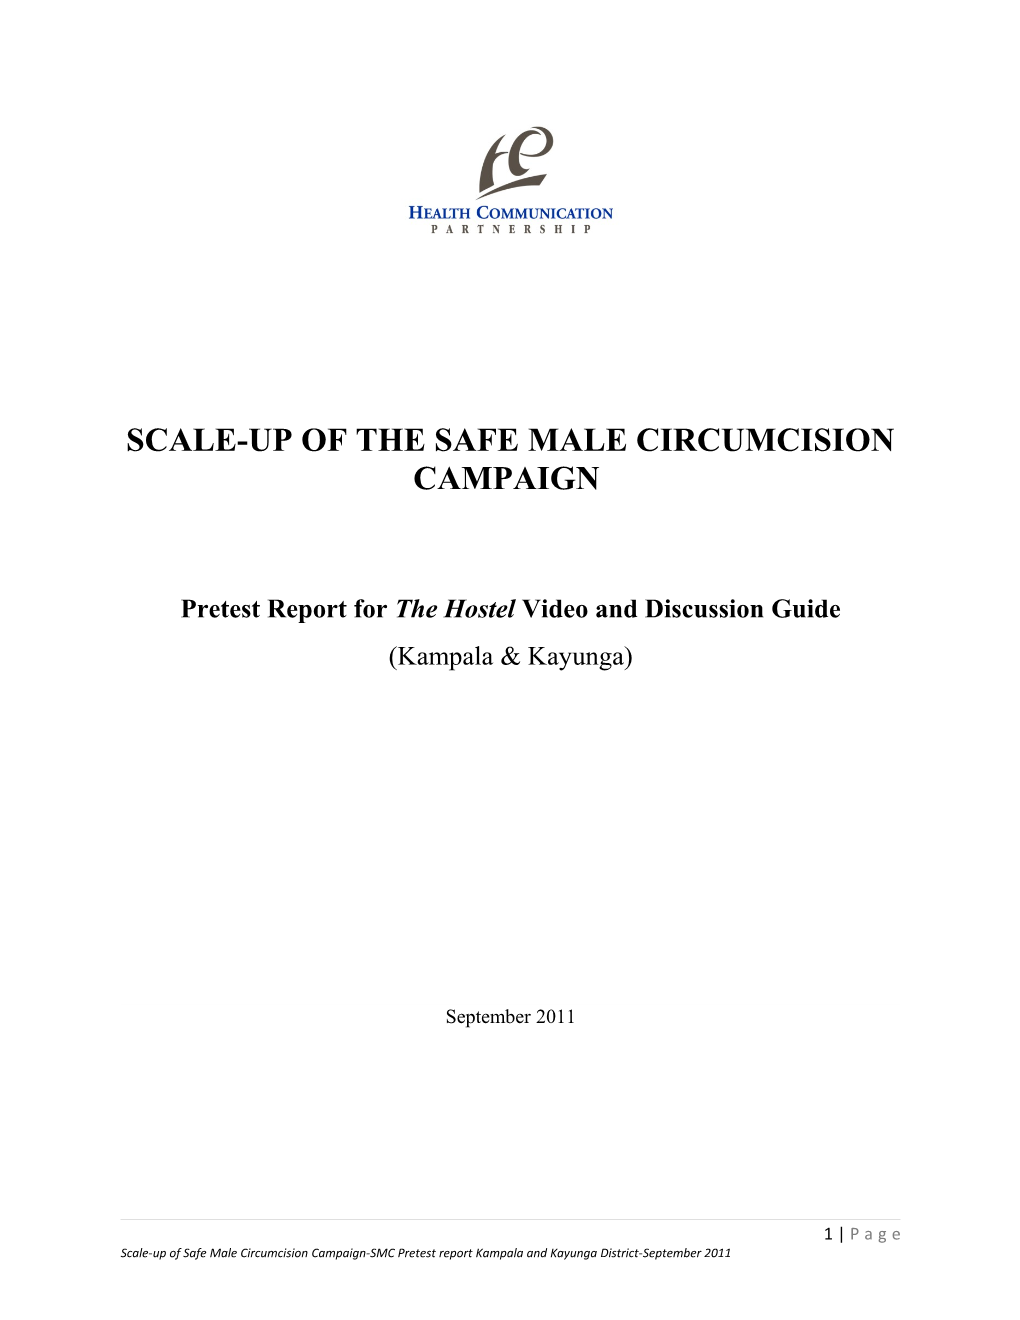 Scale-Up of the Safe Male Circumcisioncampaign